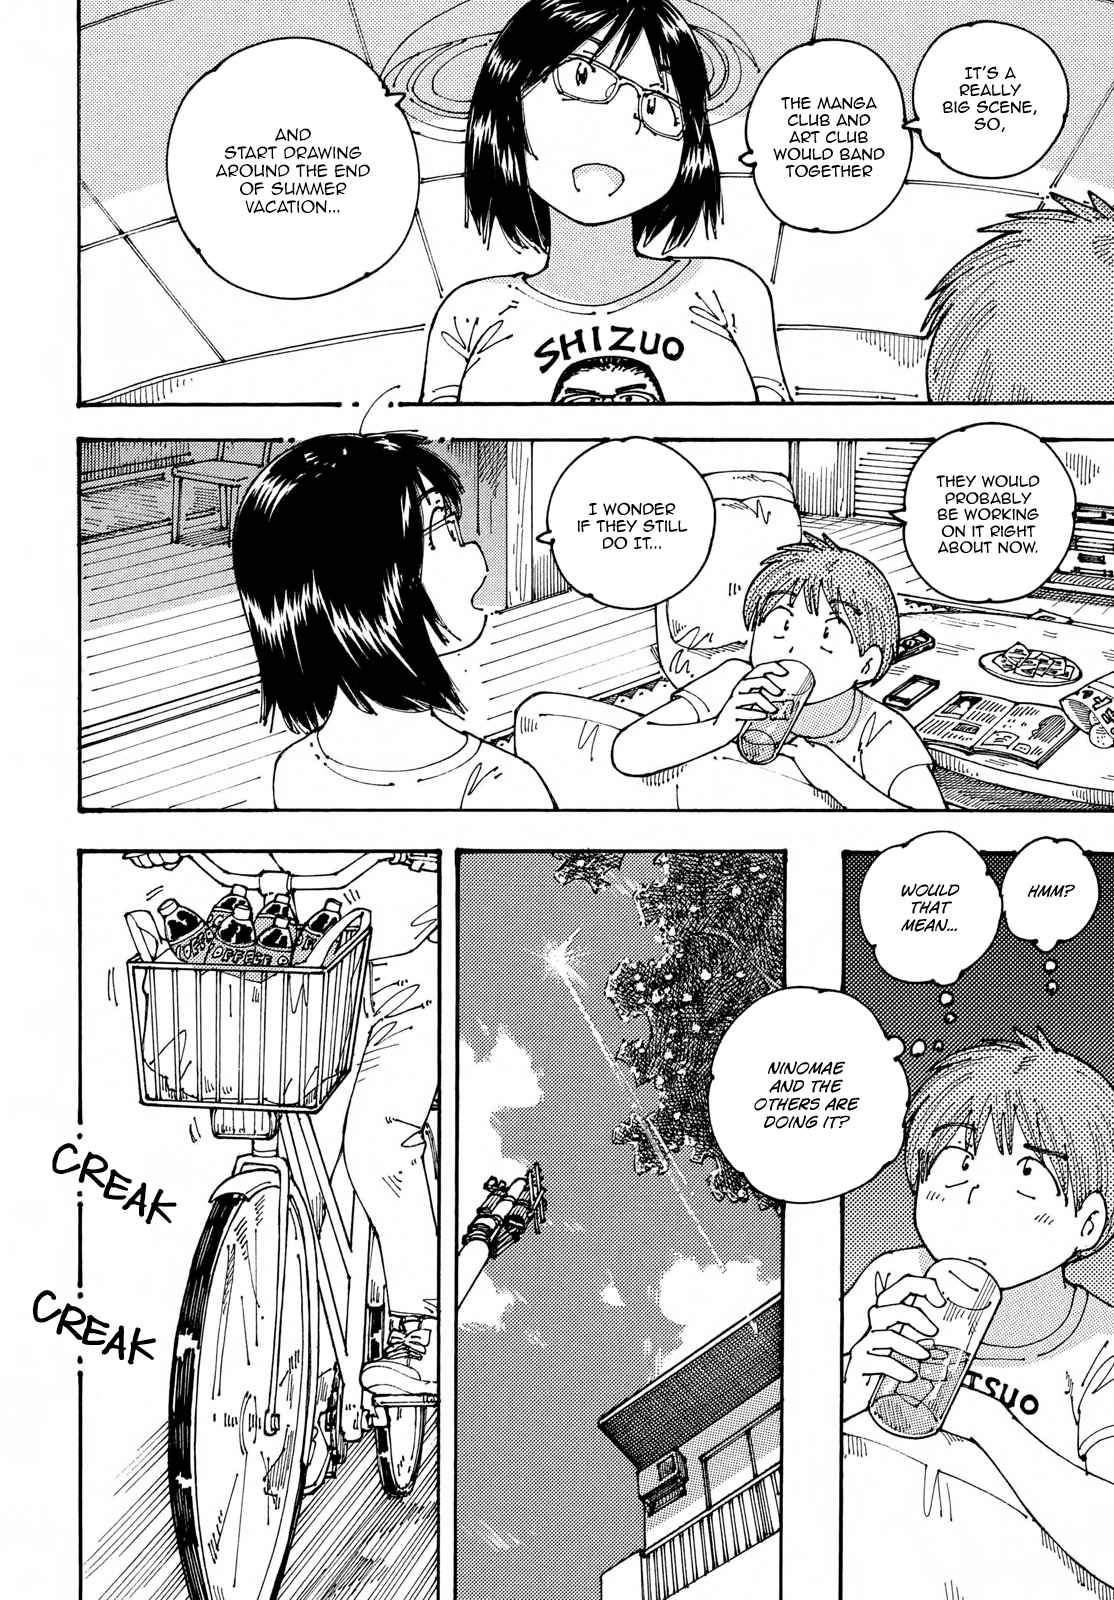 Ookumo chan Flashback Vol. 4 Ch. 18 The Same Scene as the One I'm Seeing.